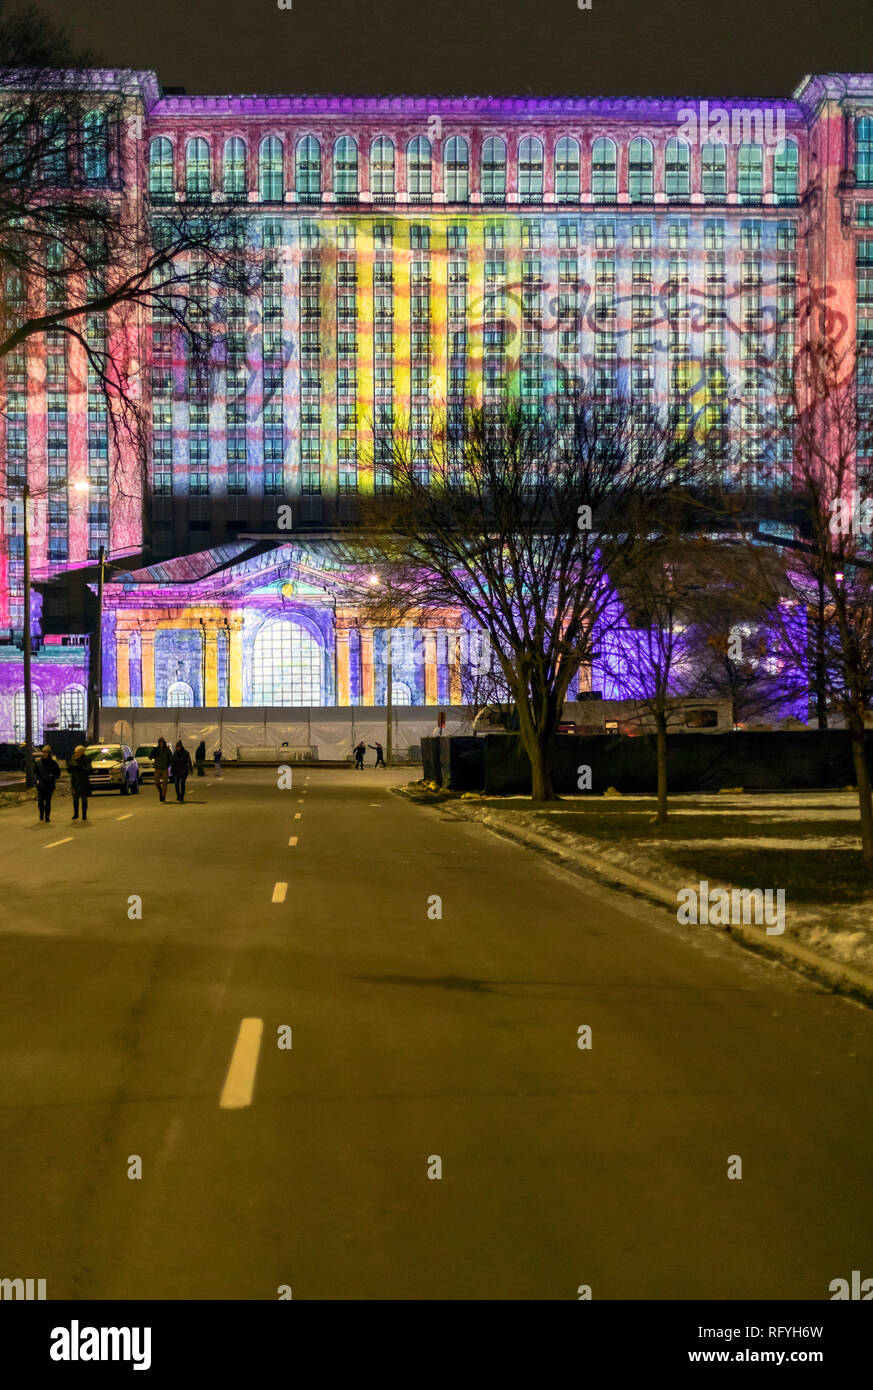 Detroit, Michigan - Ford Motor Company projected a light show on the Michigan Central railroad station during a Winter Festival. Ford bought the long- Stock Photo